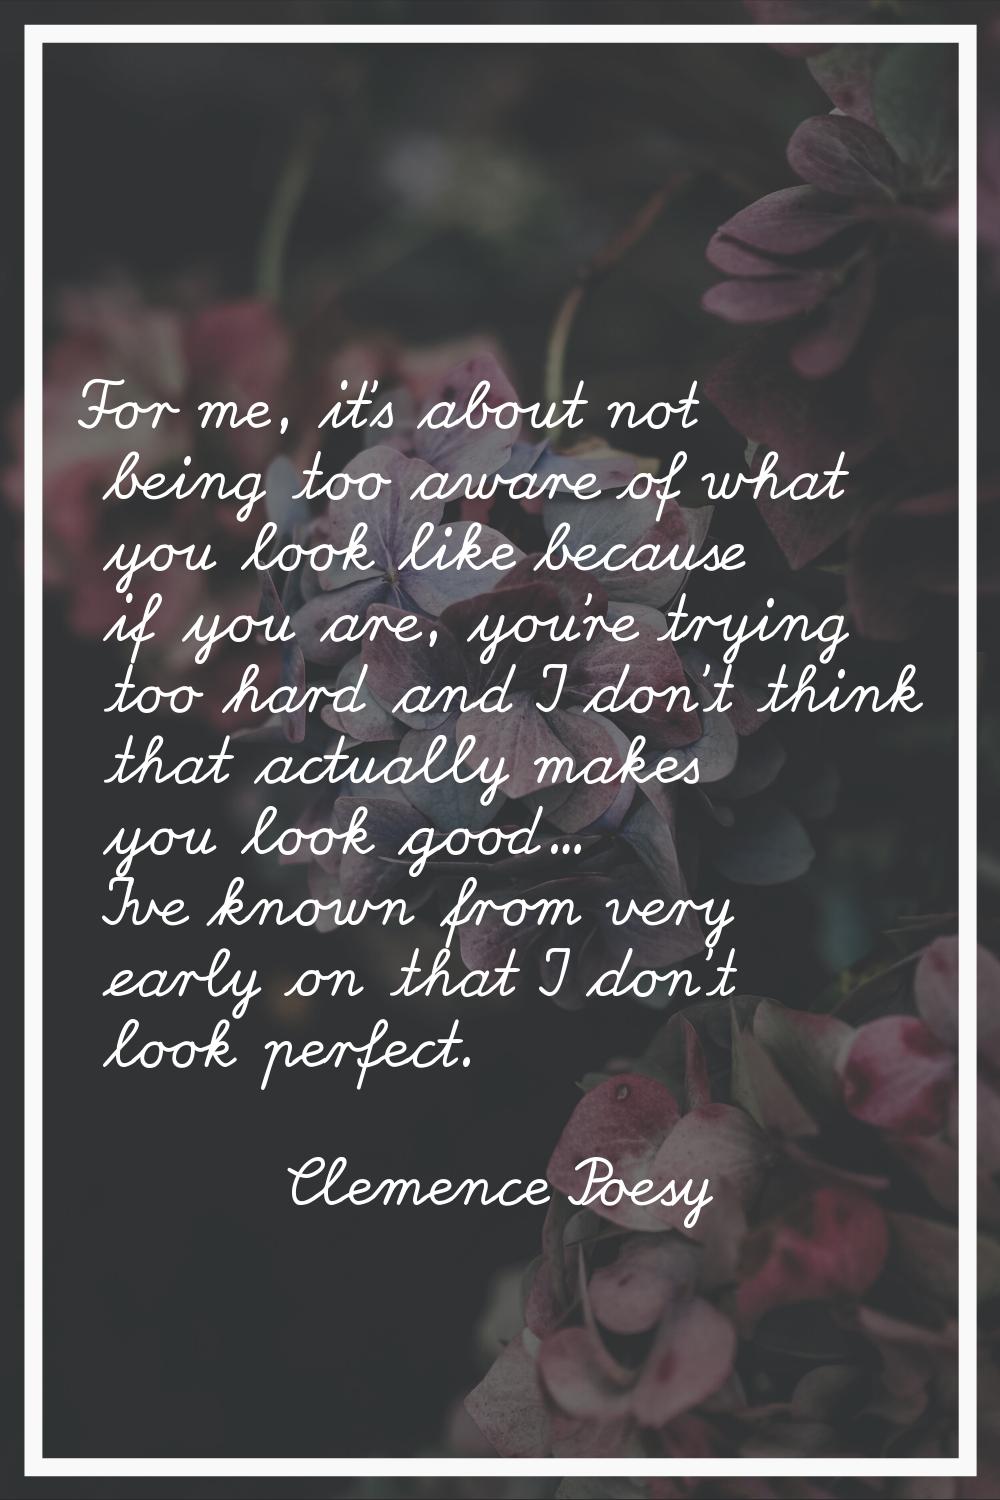 For me, it's about not being too aware of what you look like because if you are, you're trying too 